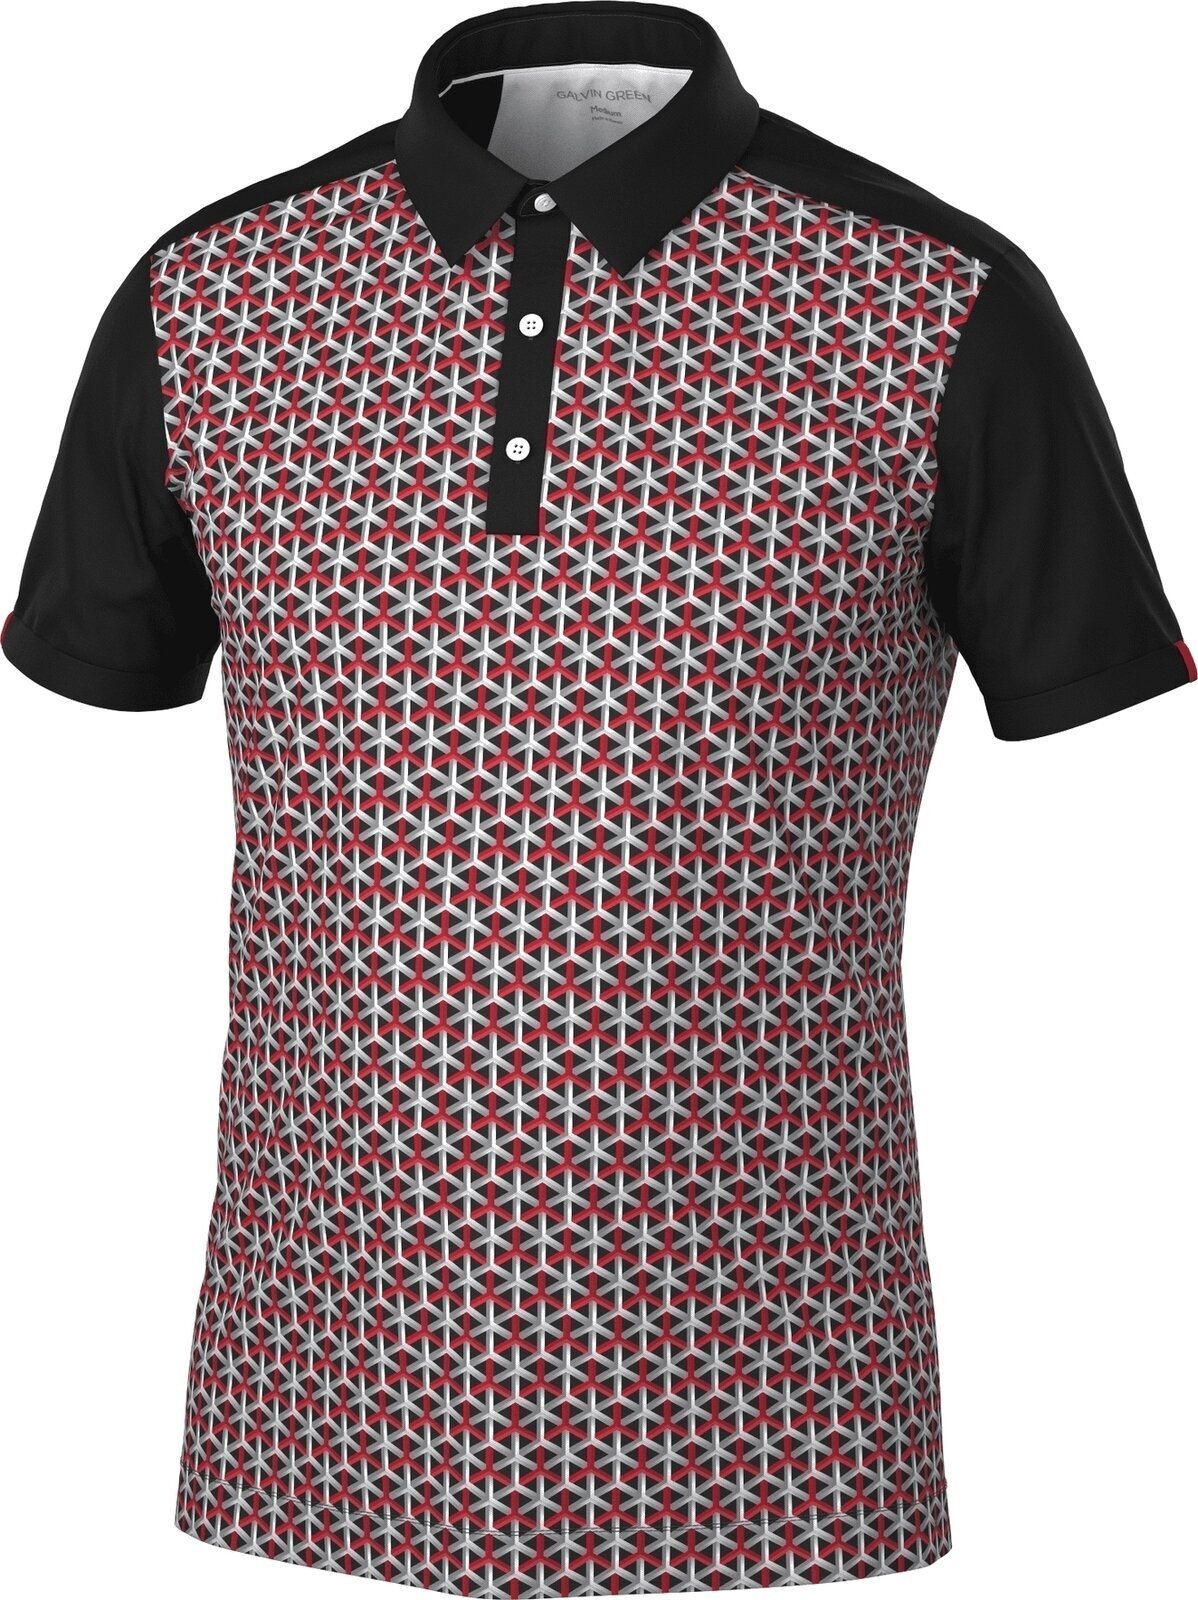 Tricou polo Galvin Green Mio Mens Breathable Short Sleeve Shirt Red/Black M